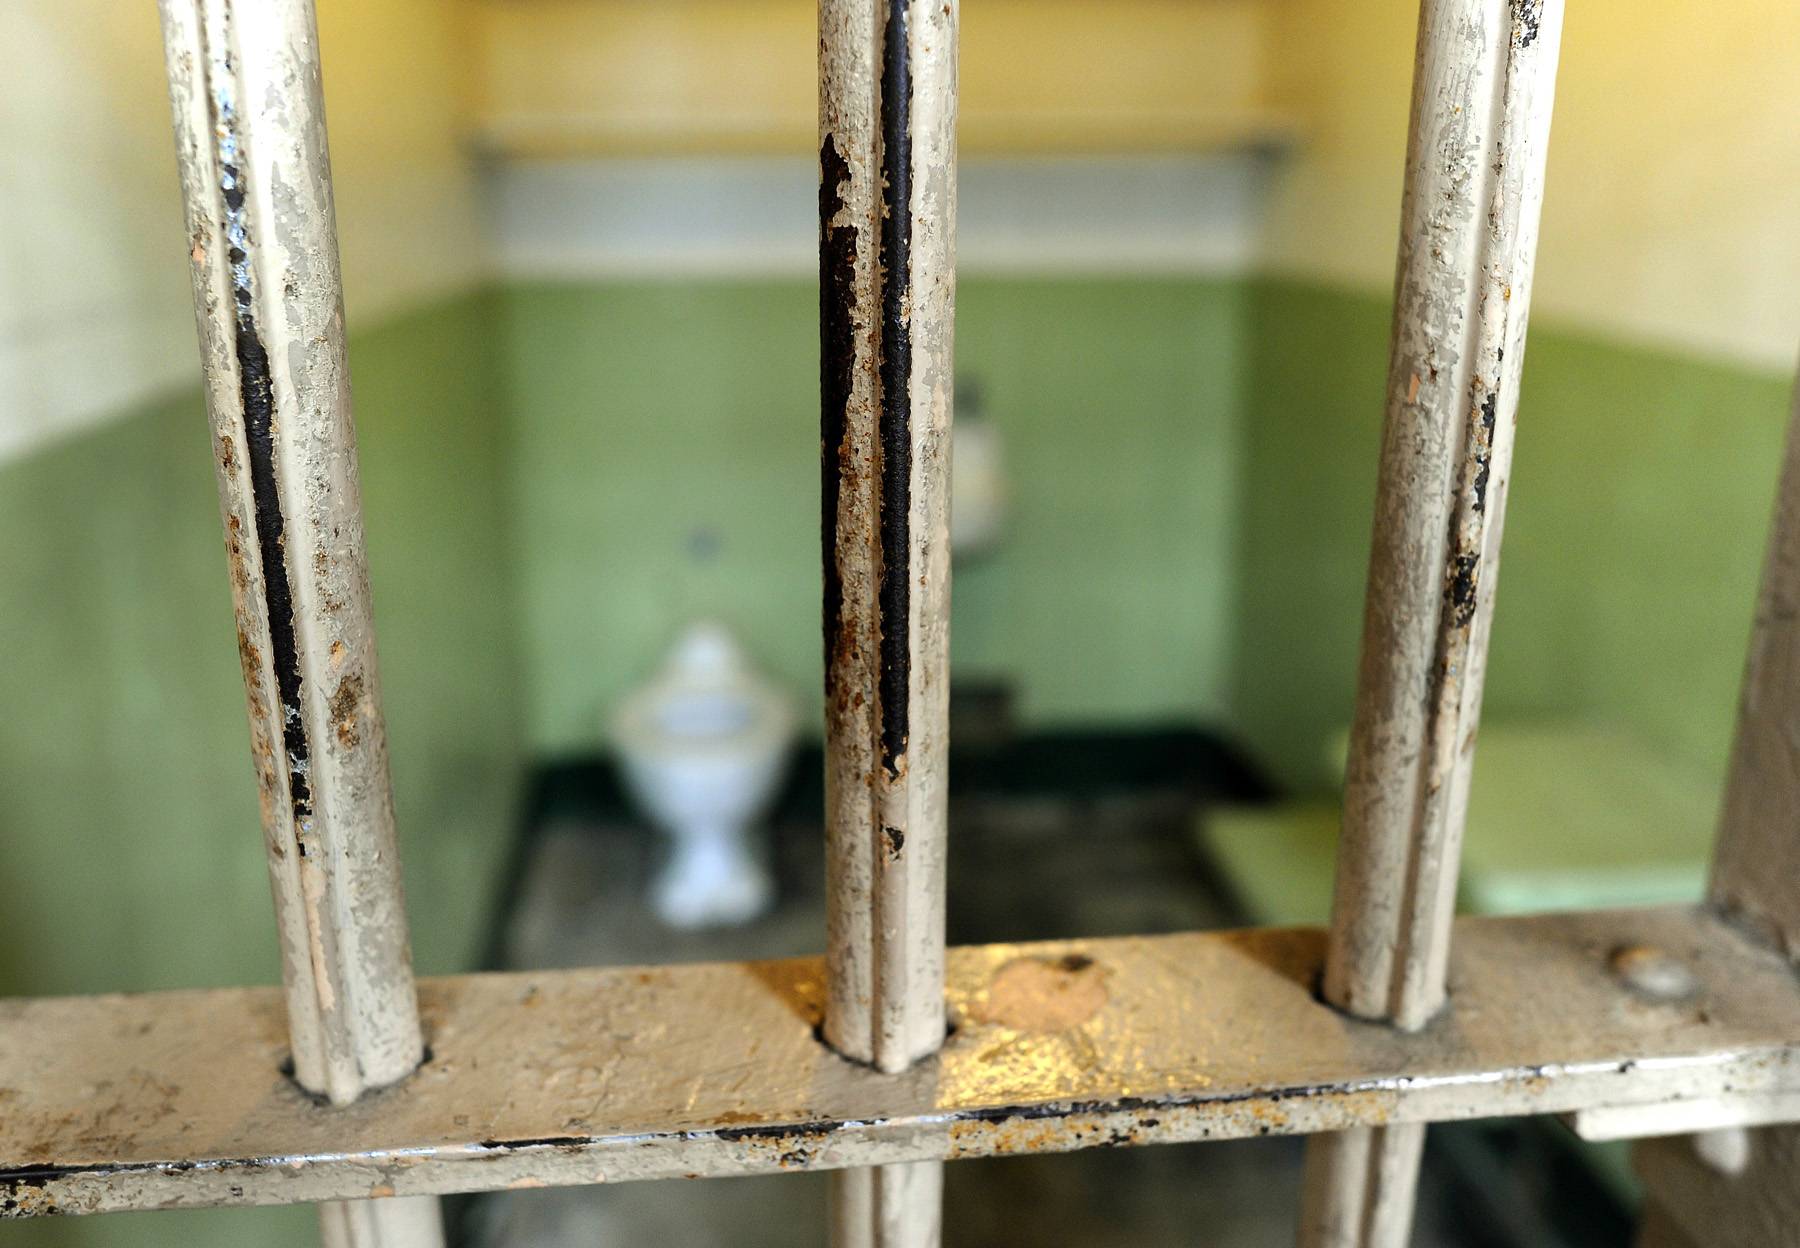 Wisconsin Has Highest Black Male Incarceration Rate